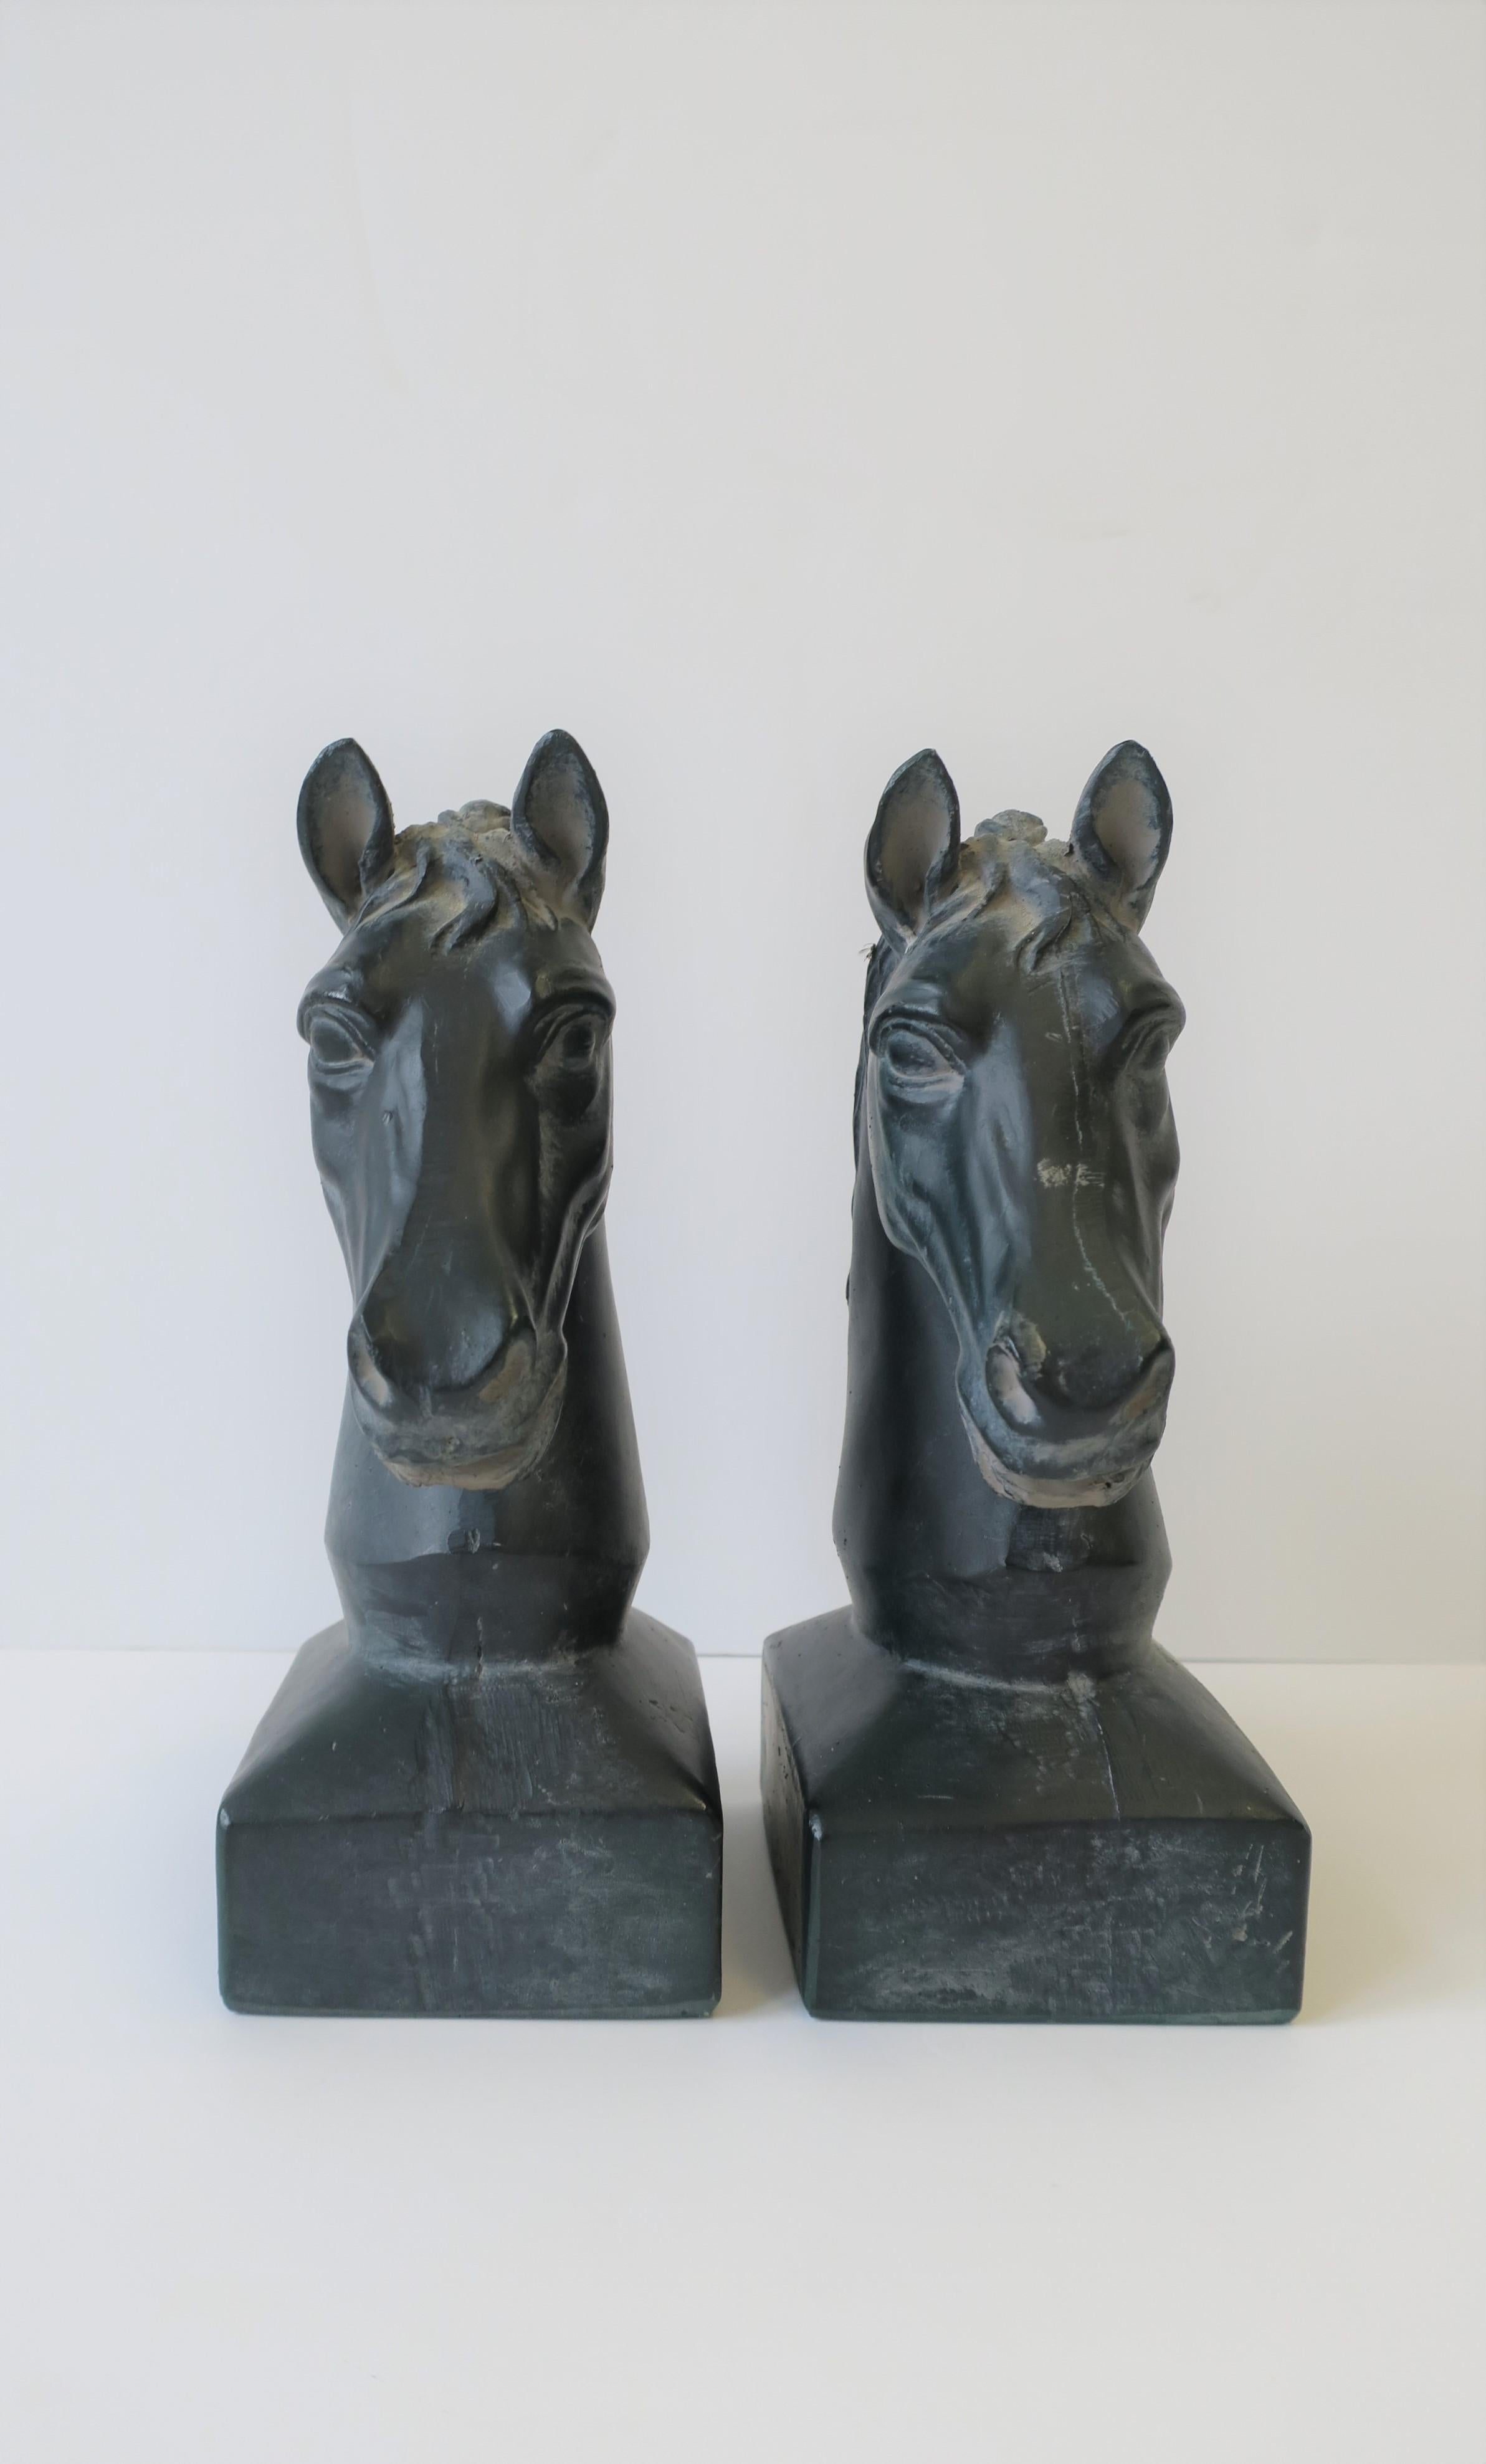 Resin Pair of Vintage Horse or Equine Bookends